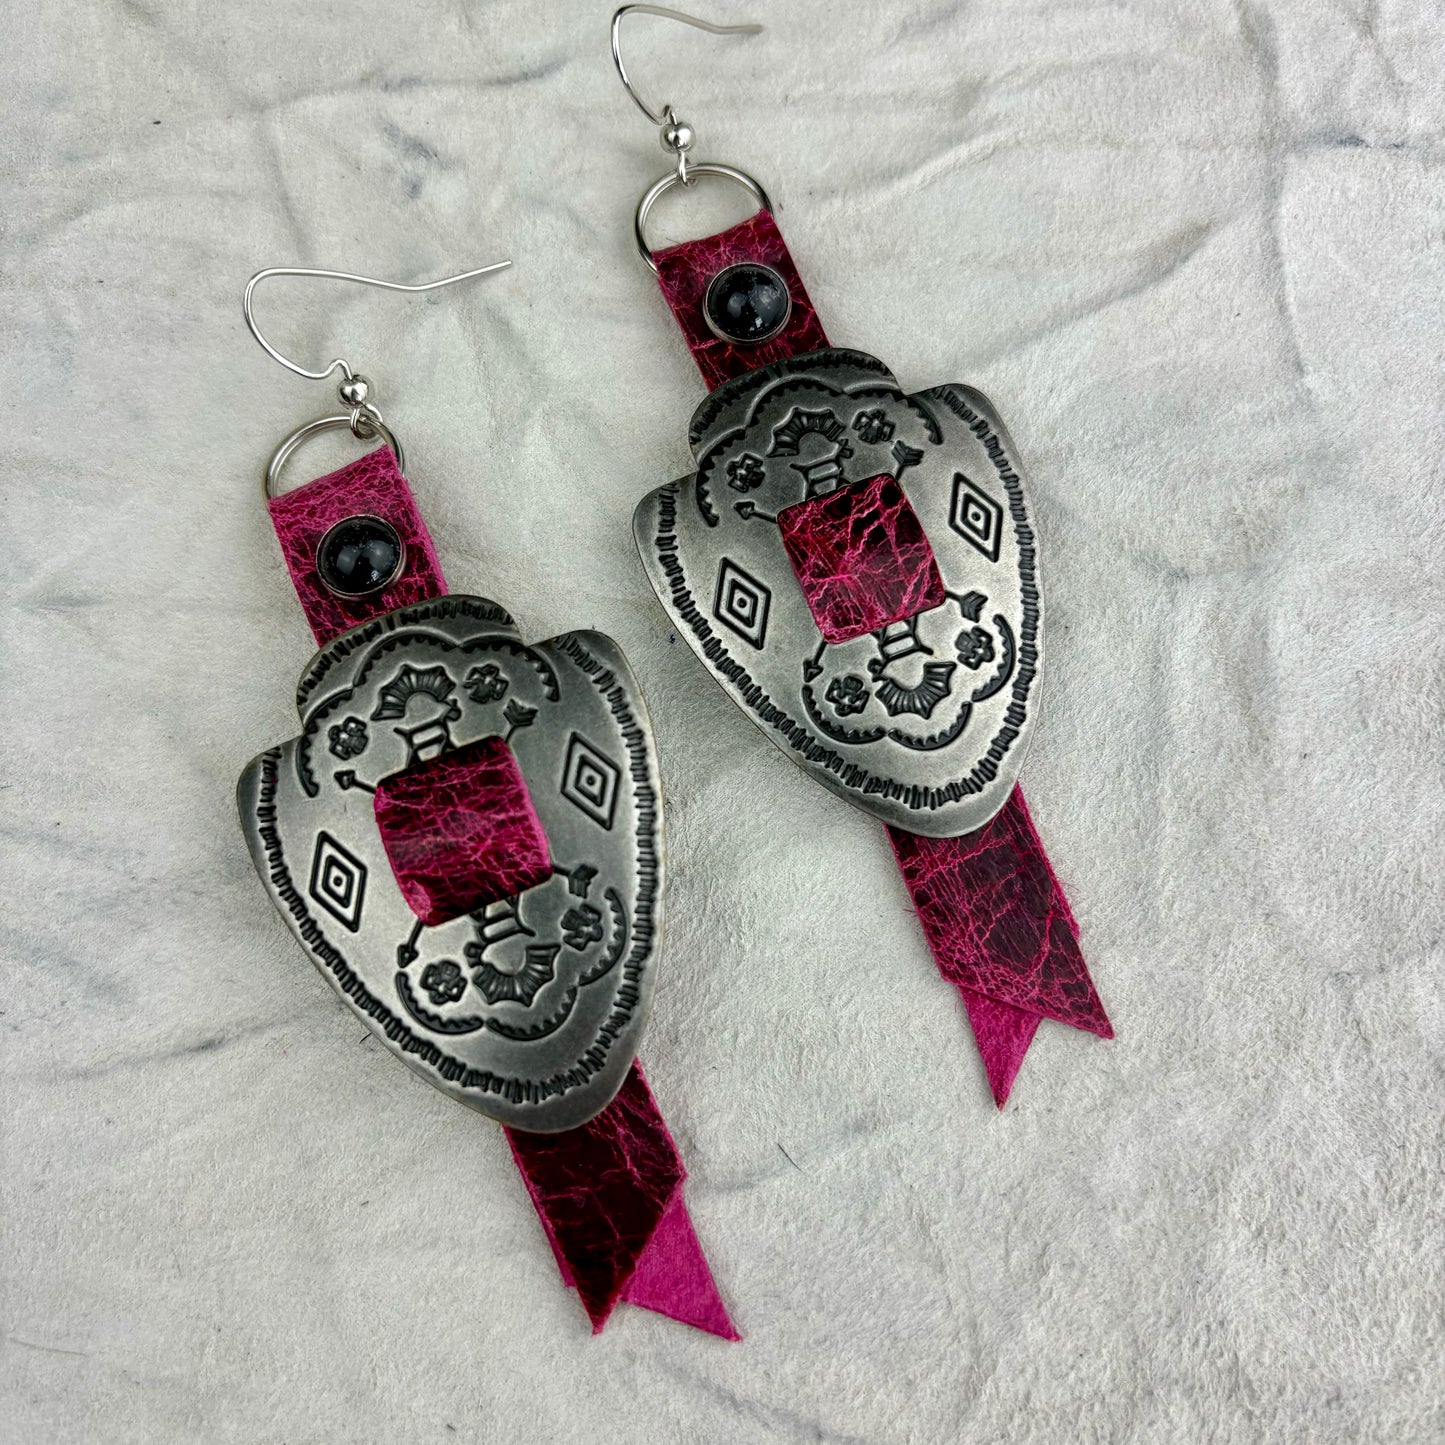 Arrowhead Concho Earrings with Hot Pink Leather